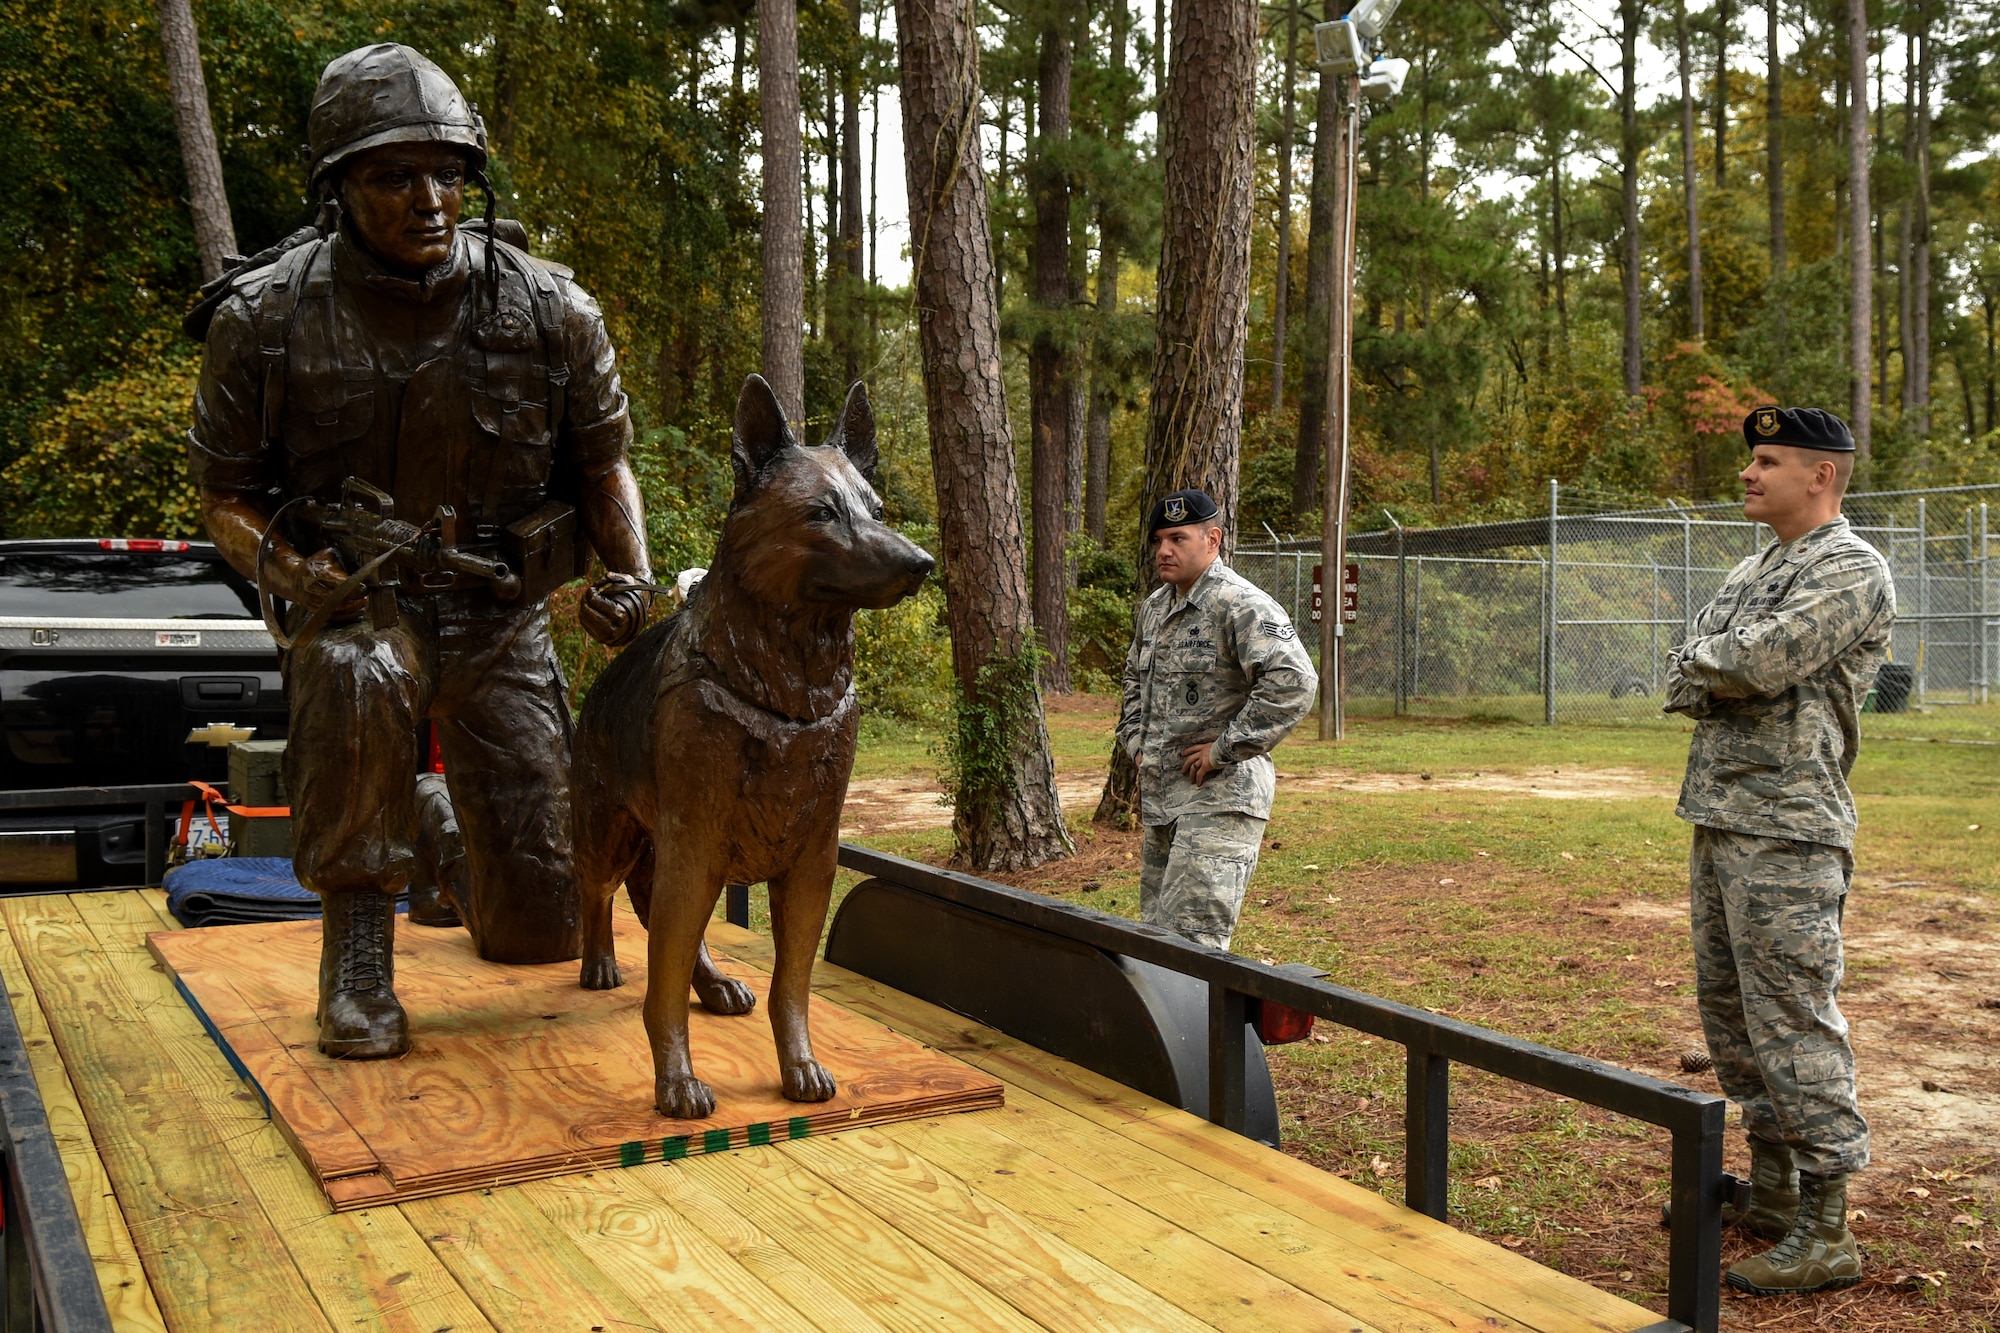 Staff Sgt. John Makripodis (left), 4th Security Forces Squadron kennel master, and Maj. Brent Gallant, 4th SFS commander, admire a War Dog Memorial statue, Oct. 27, 2015, at Seymour Johnson Air Force Base, North Carolina. Before reaching its permanent home at Veterans Memorial Park in Columbia, South Carolina, the statue traveled around North Carolina to all military installations for viewing. (U.S. Air Force photo/Airman Shawna L. Keyes)